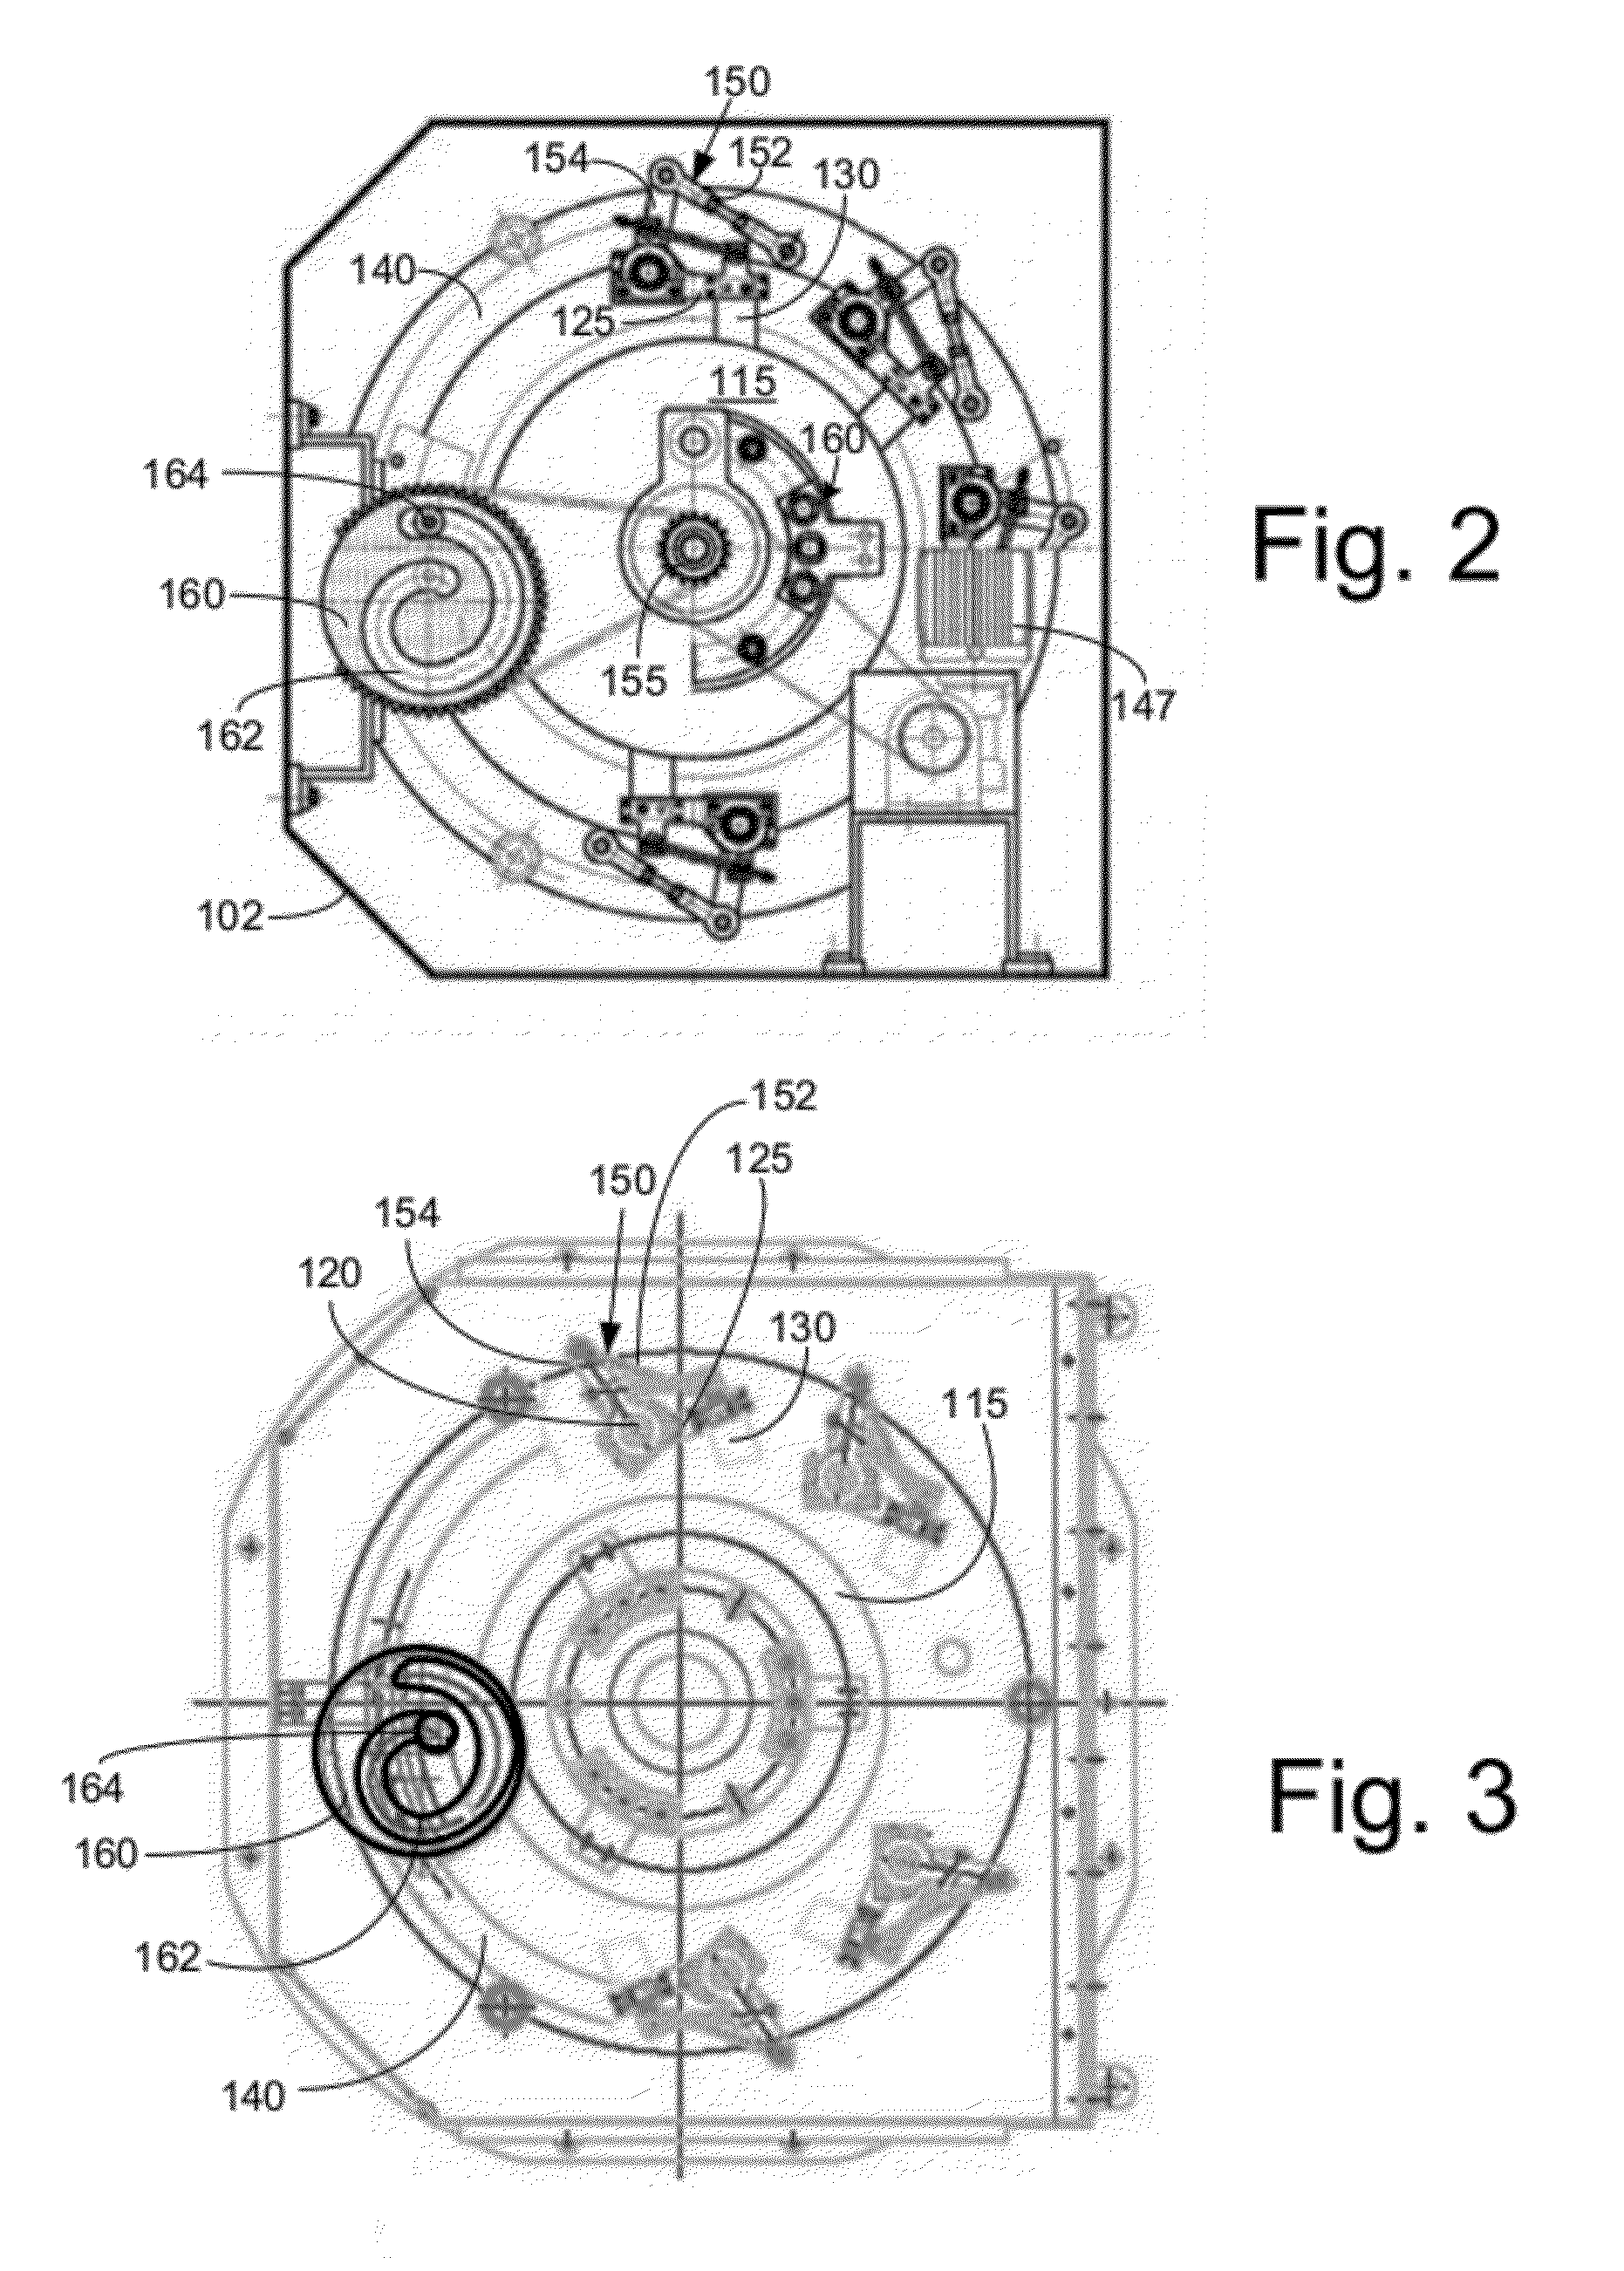 Systems, Methods, and Apparatus for Lifting Brushes of an Induction Motor